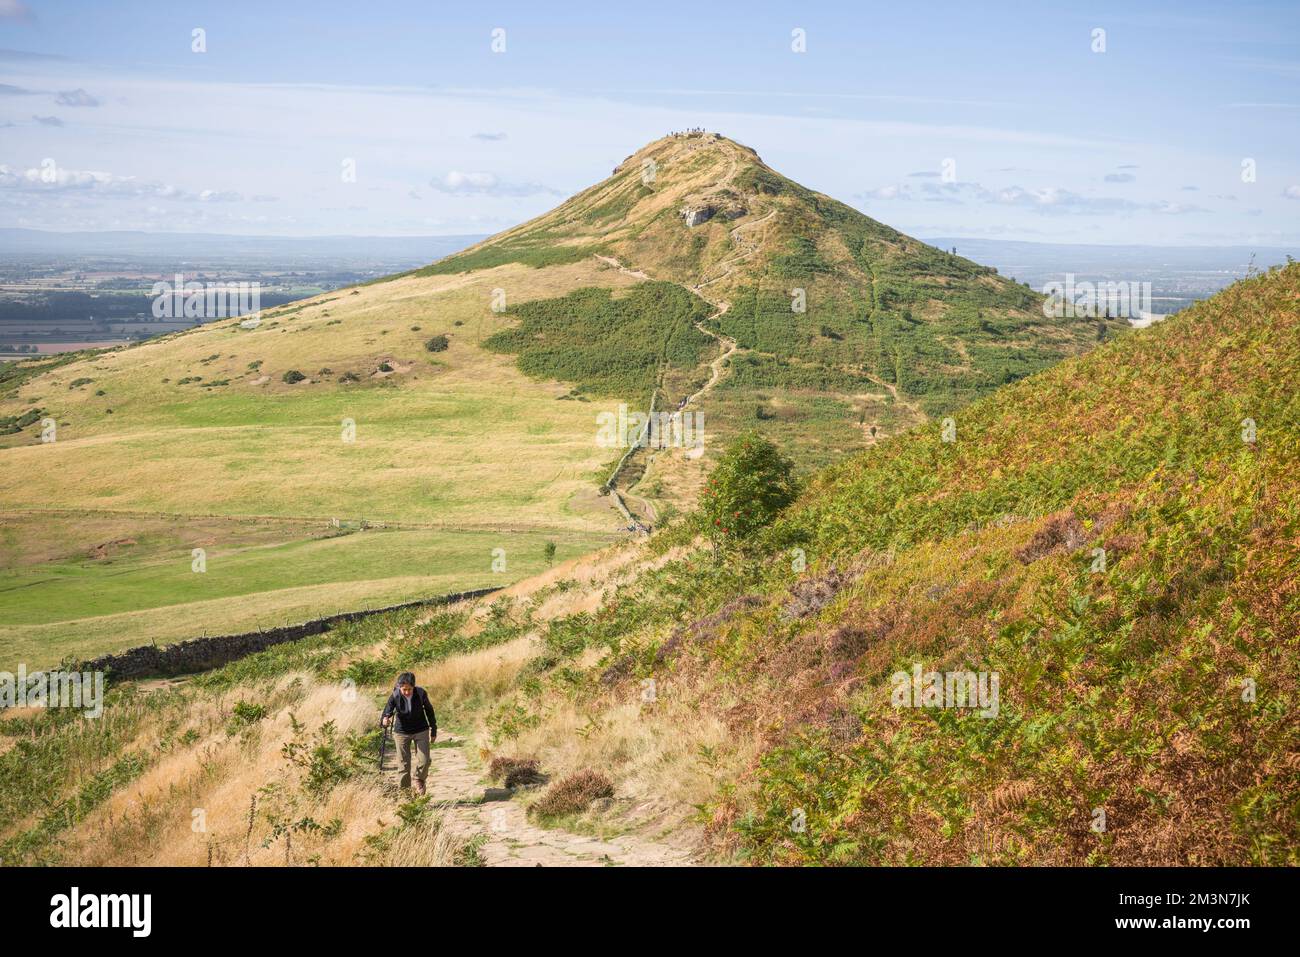 Indian (South Asian) woman hiking alone in North Yorkshire Moors with Roseberry Topping in the background. Yorkshire, England, UK Stock Photo